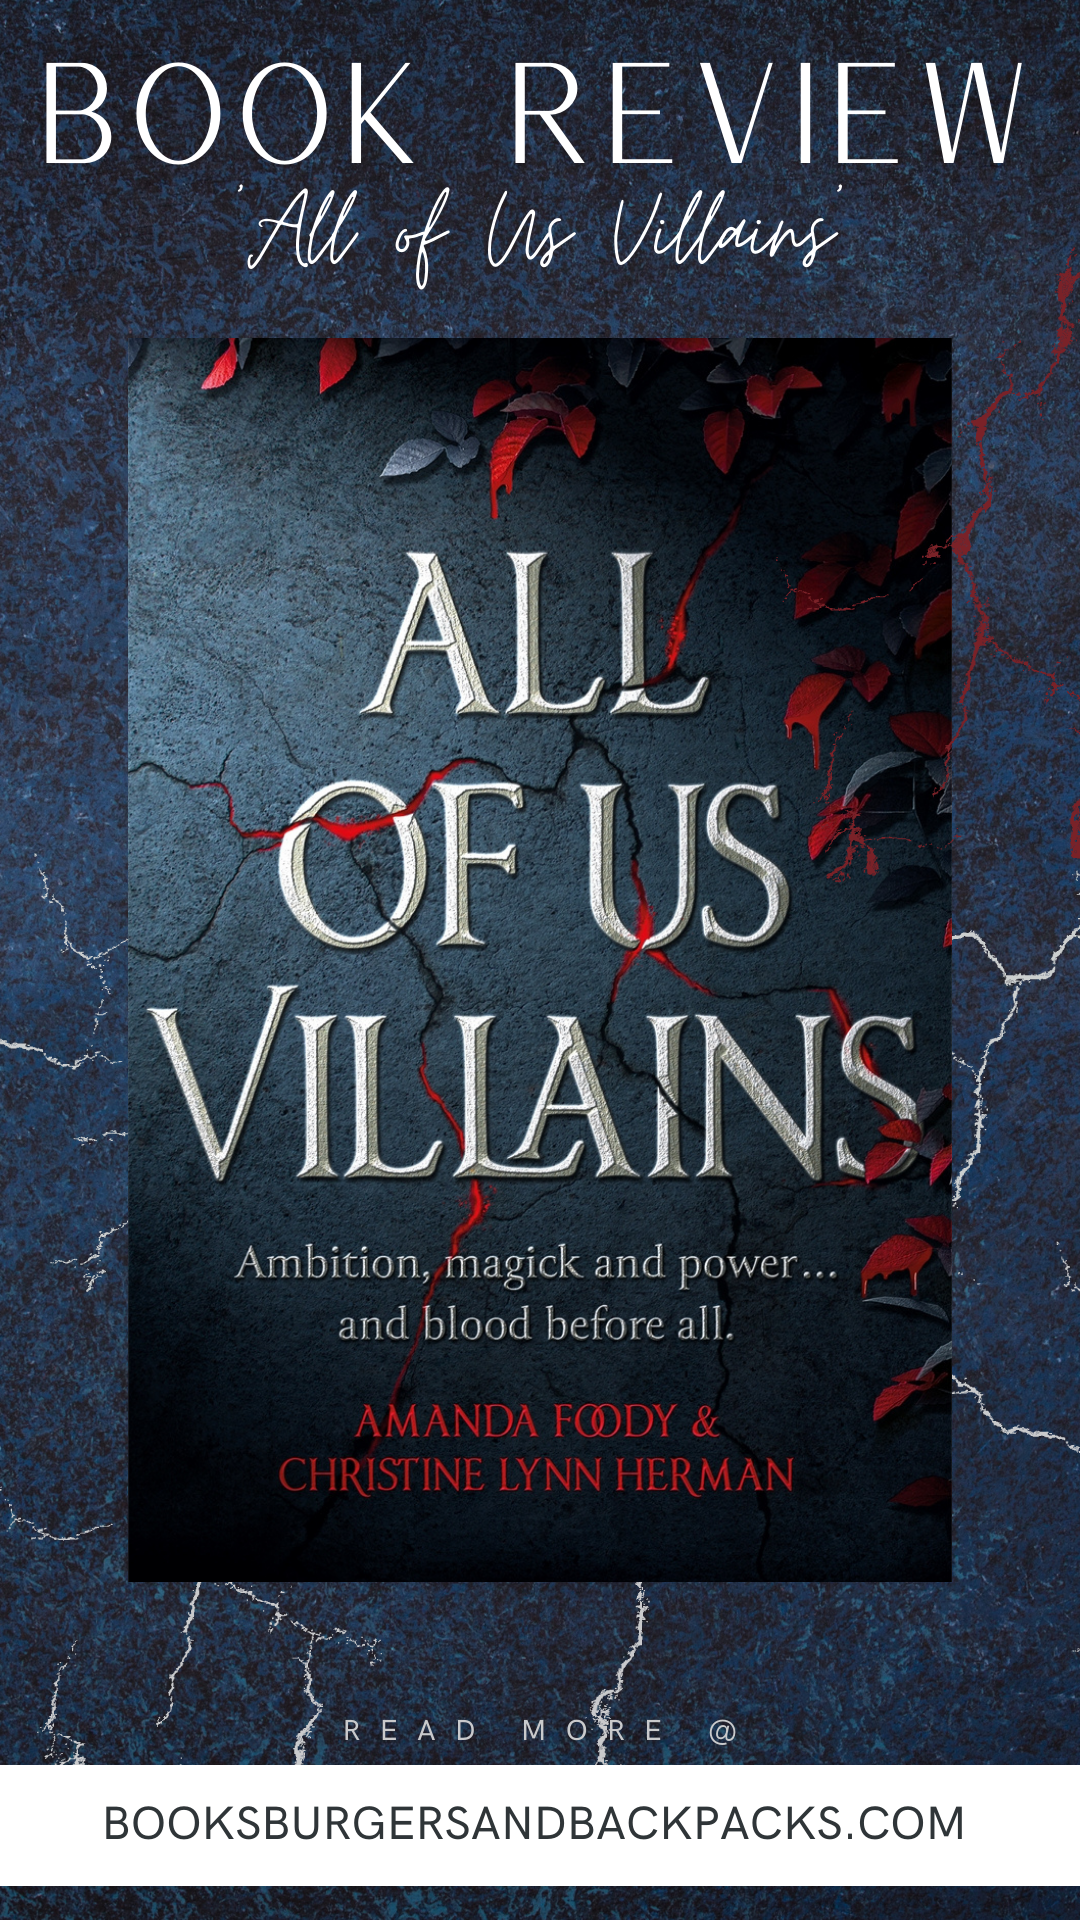 Book Review: If We Were Villains – The Voice